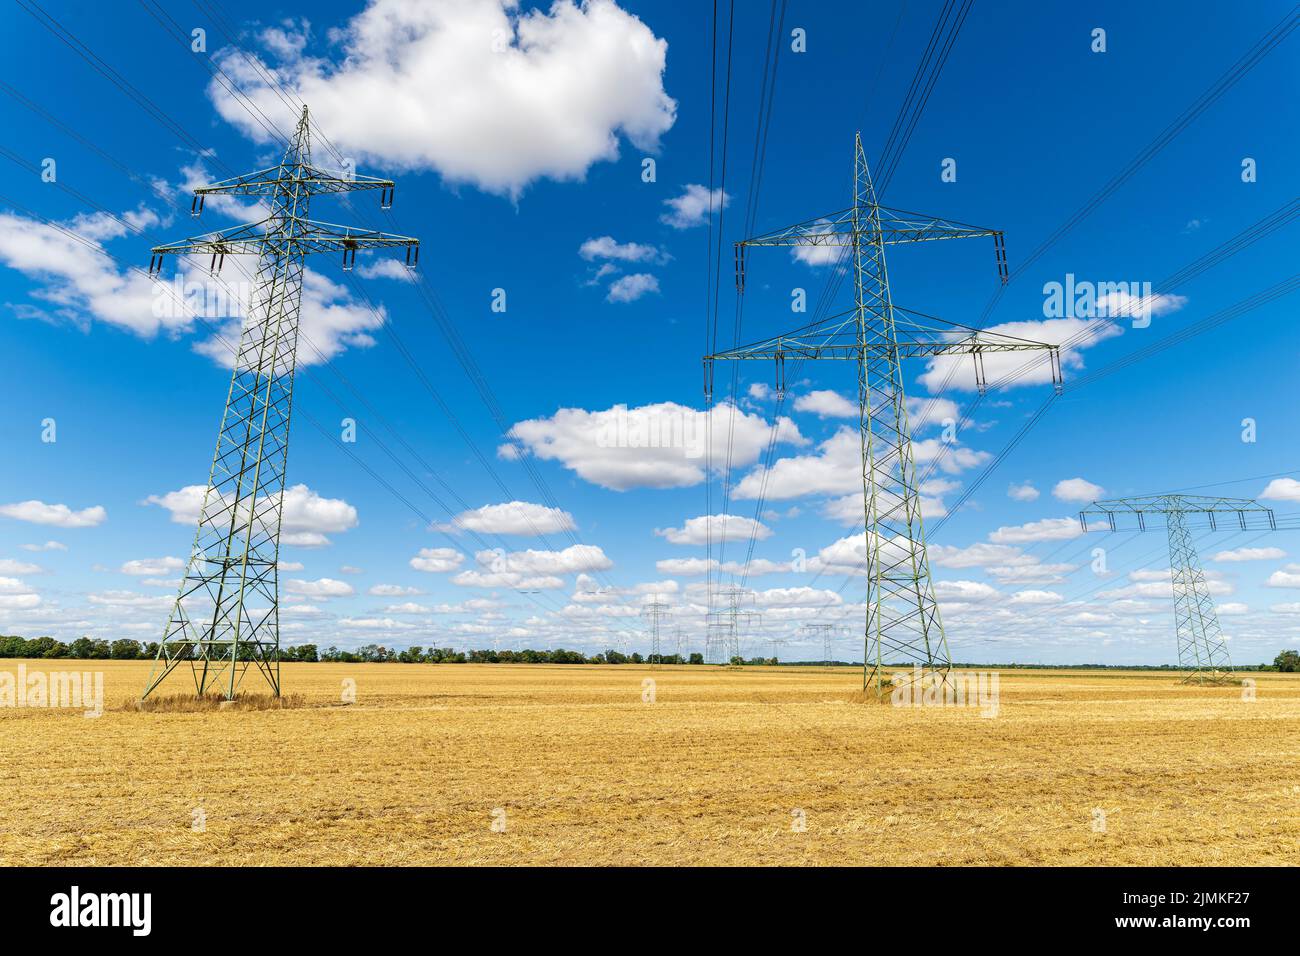 Power pylons of overhead power line under blue sky with clouds Stock Photo